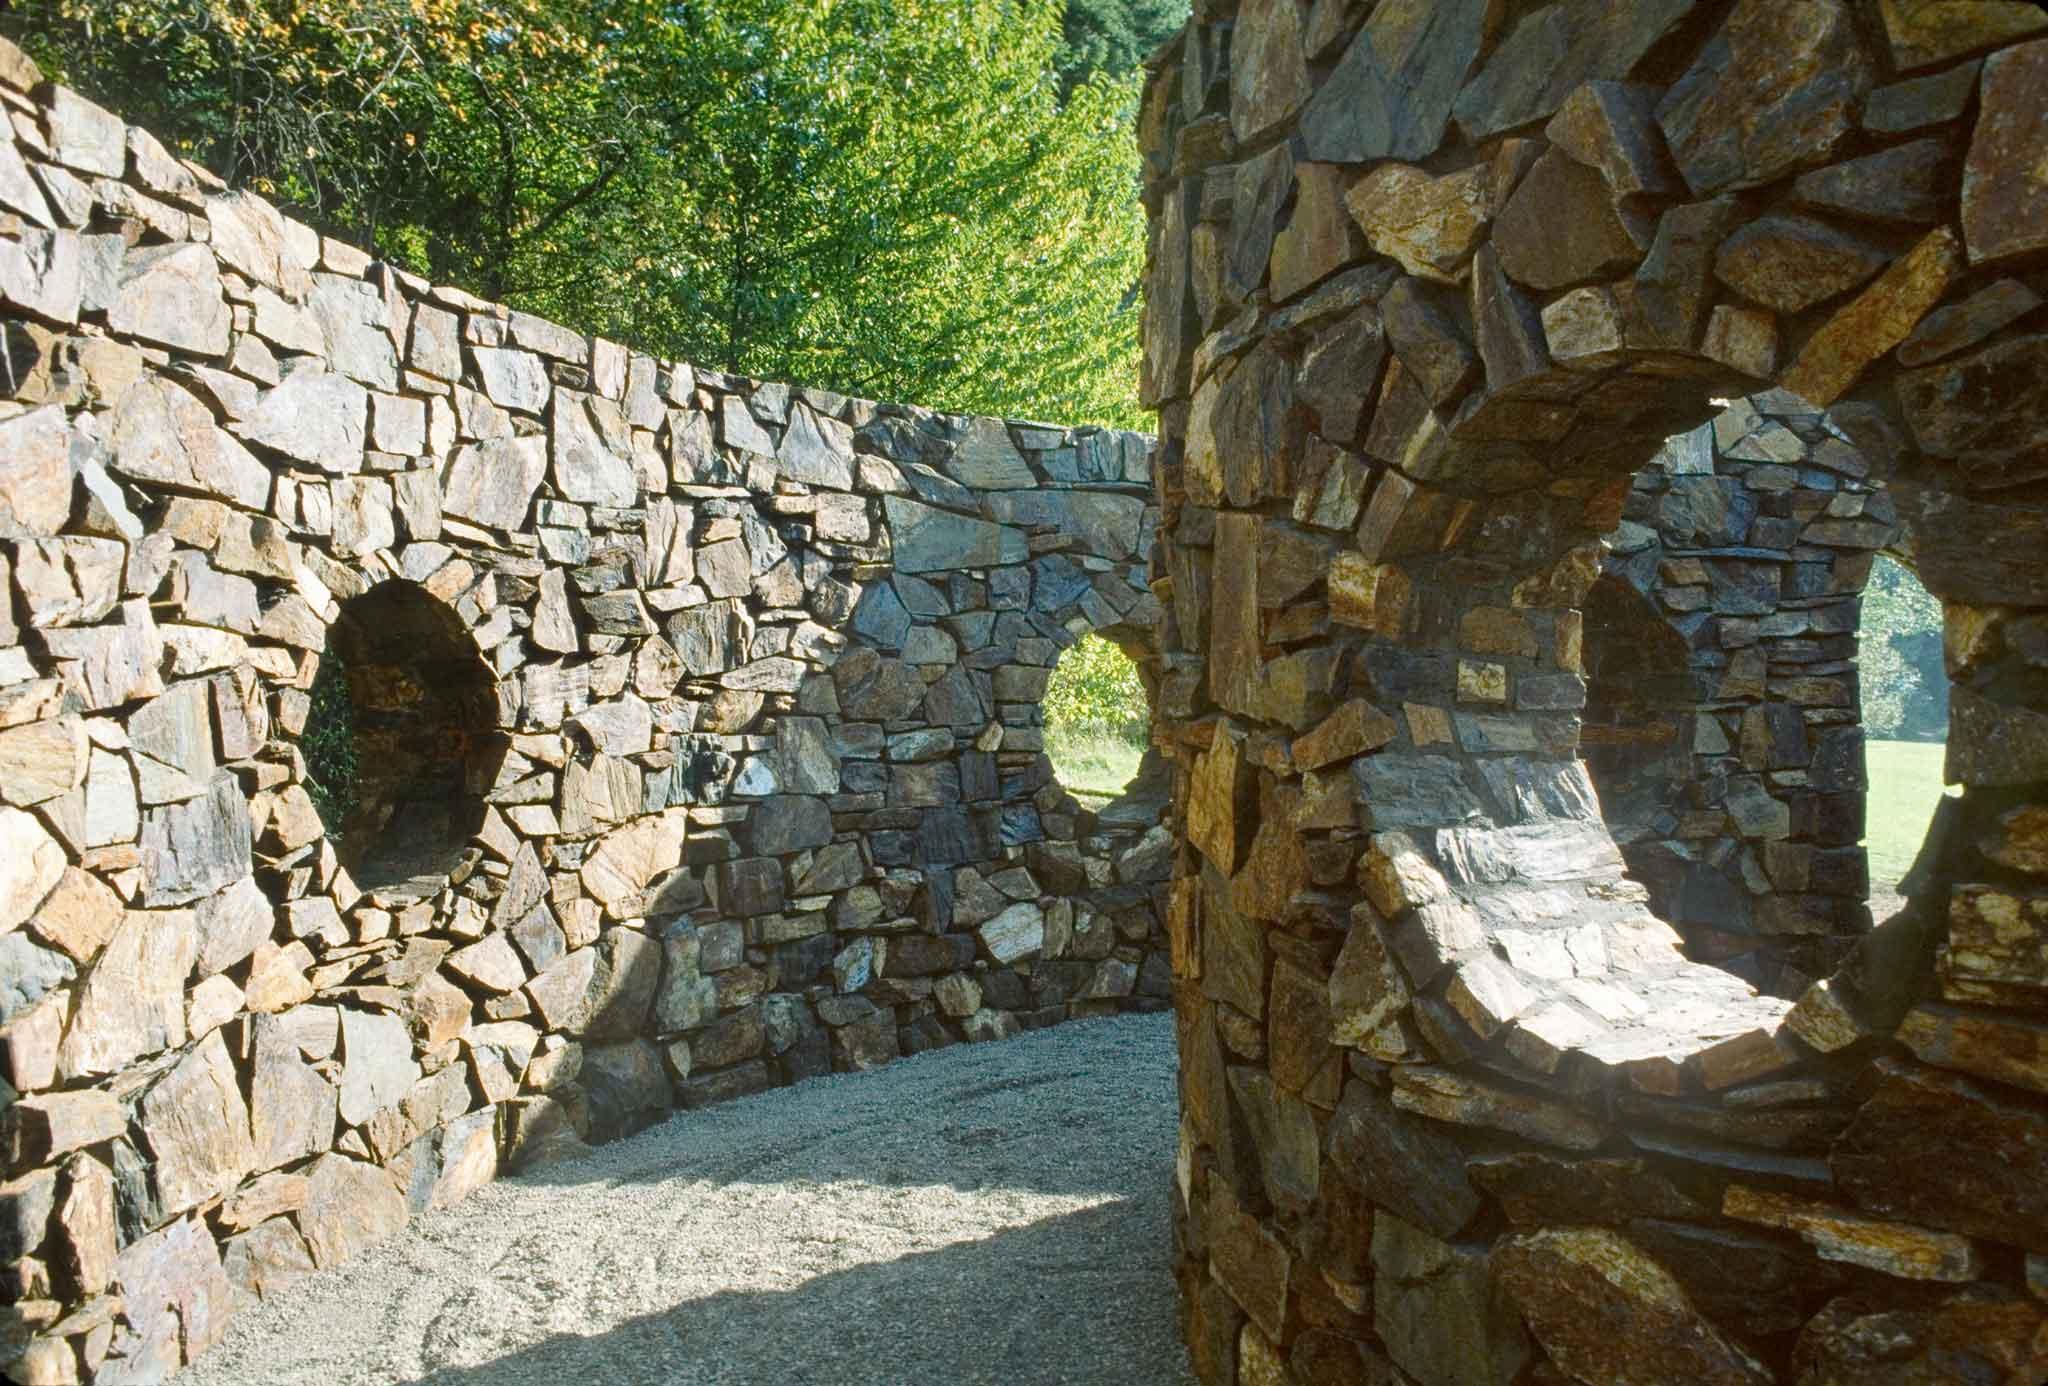 Two curved stone walls with circular openings.